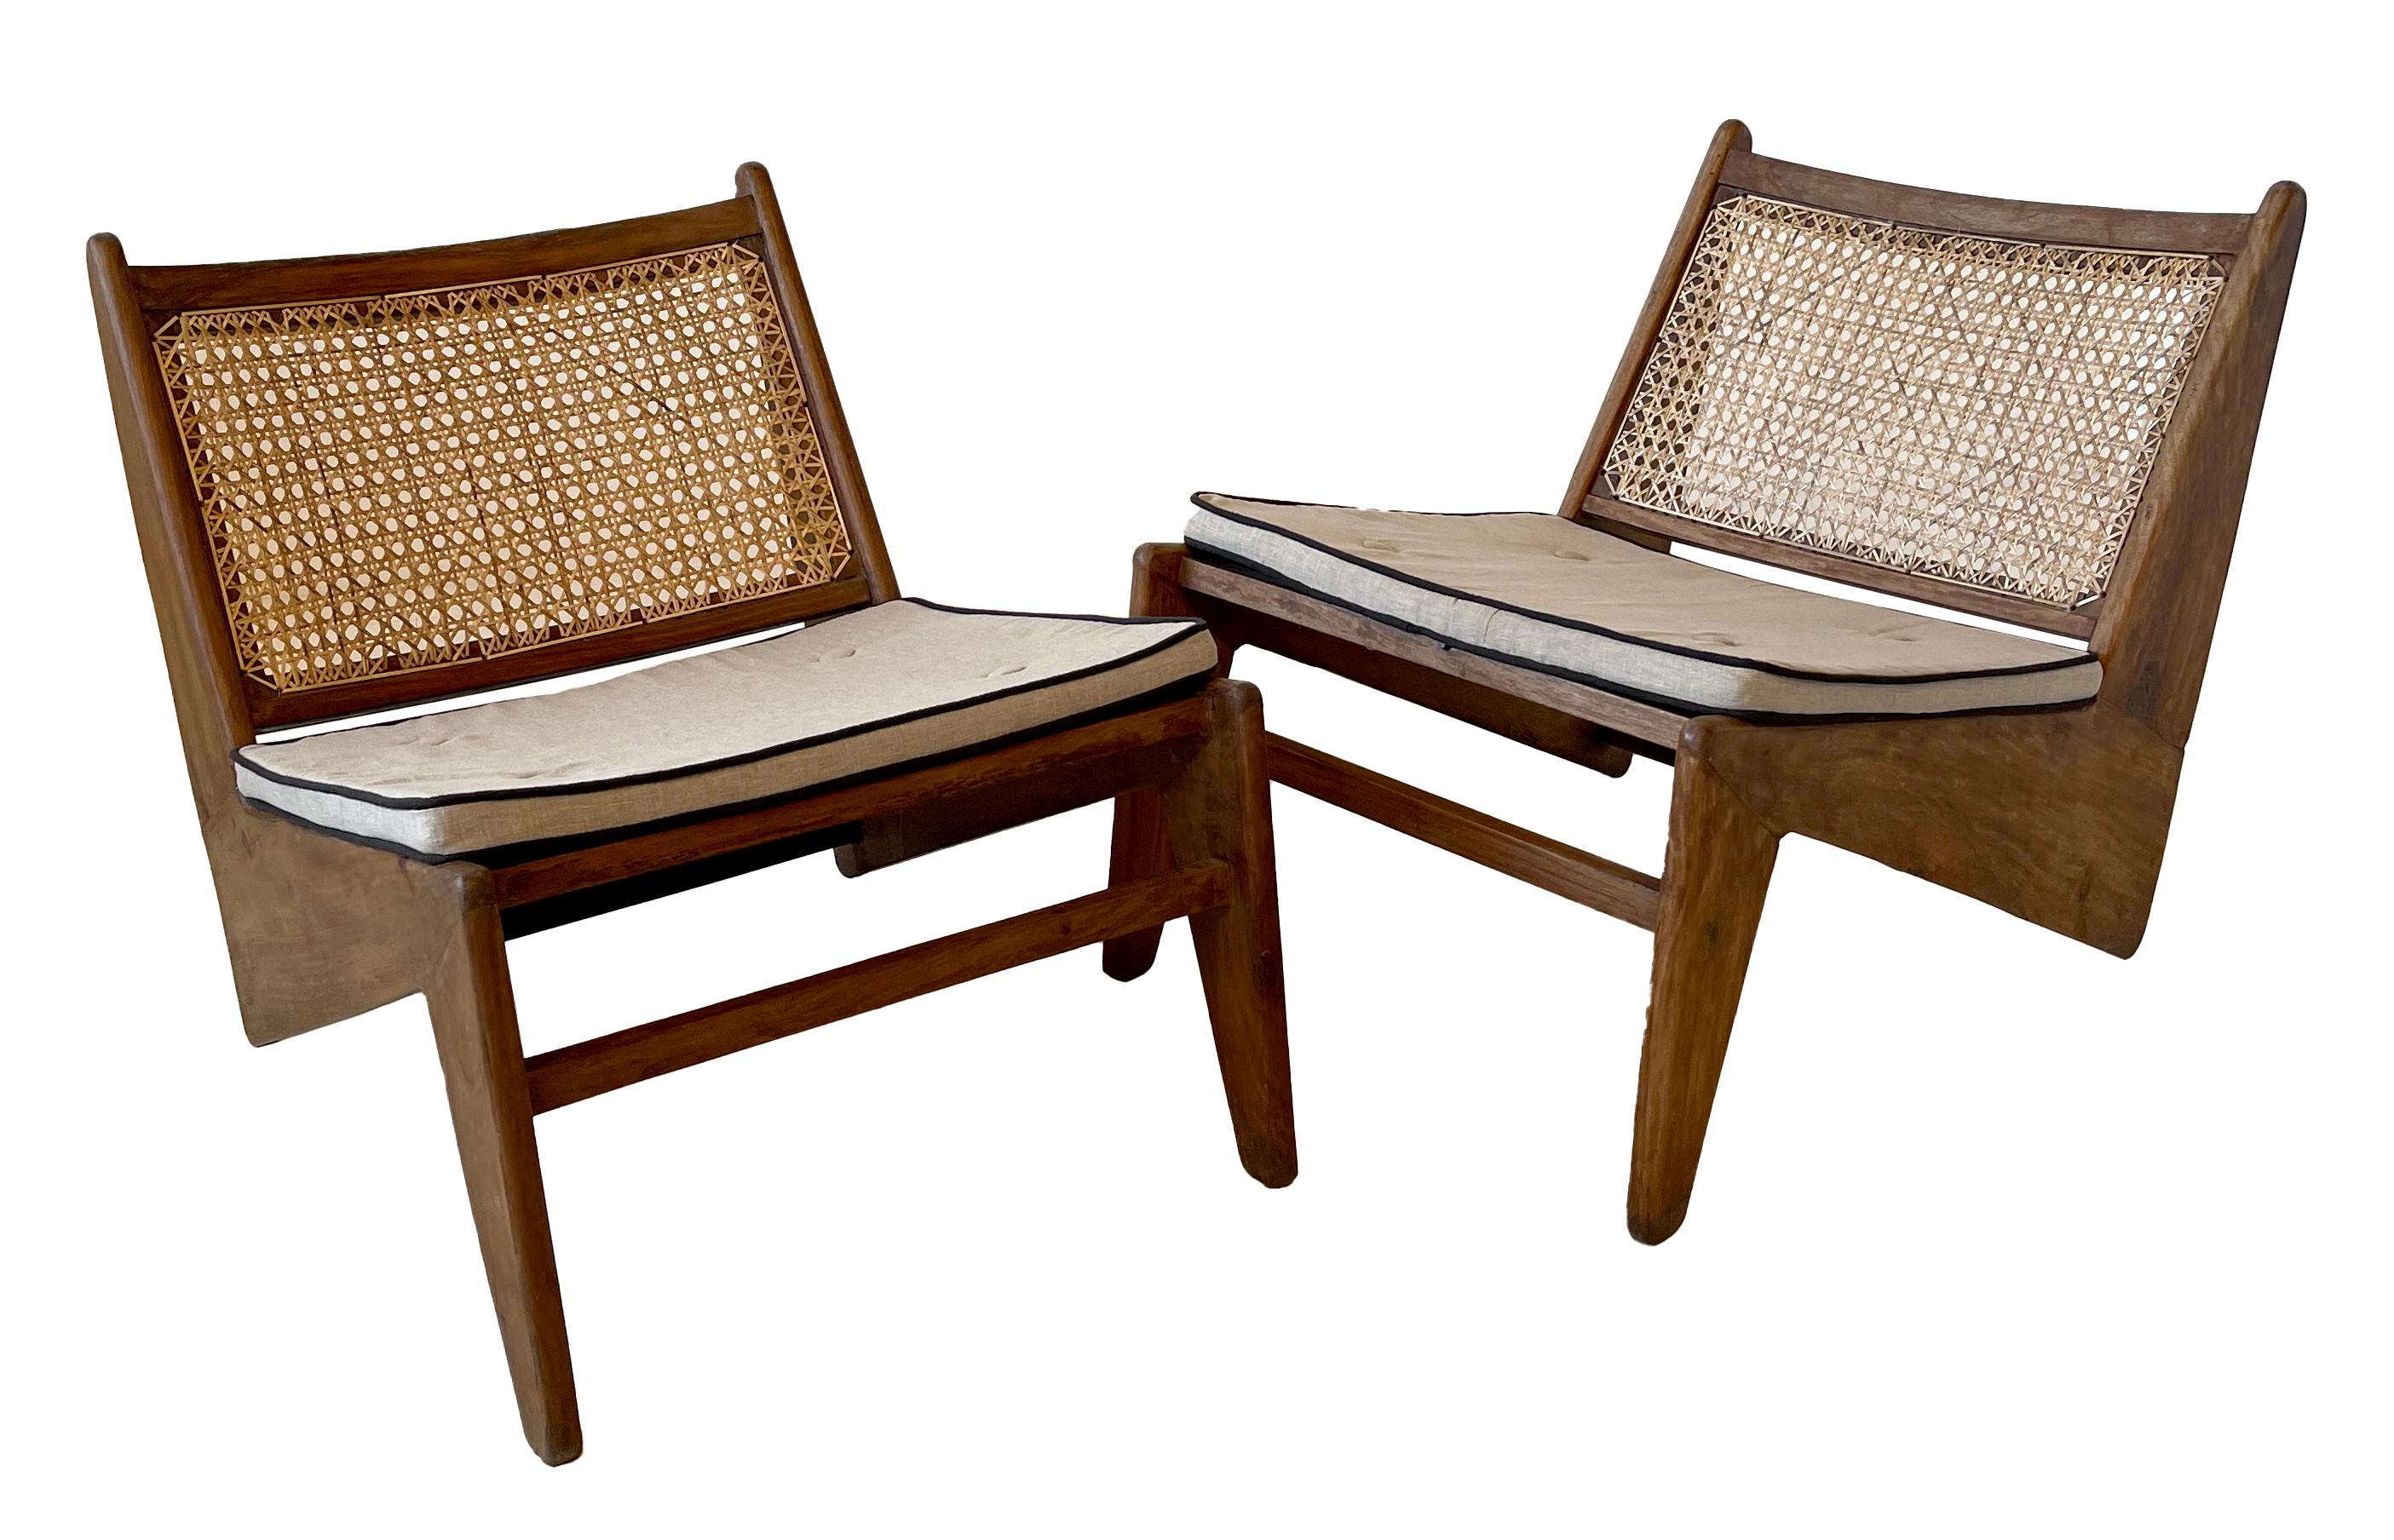 Indian Pierre Jeanneret Low Armless Lounge Chairs 'Kangaroo' For Sale